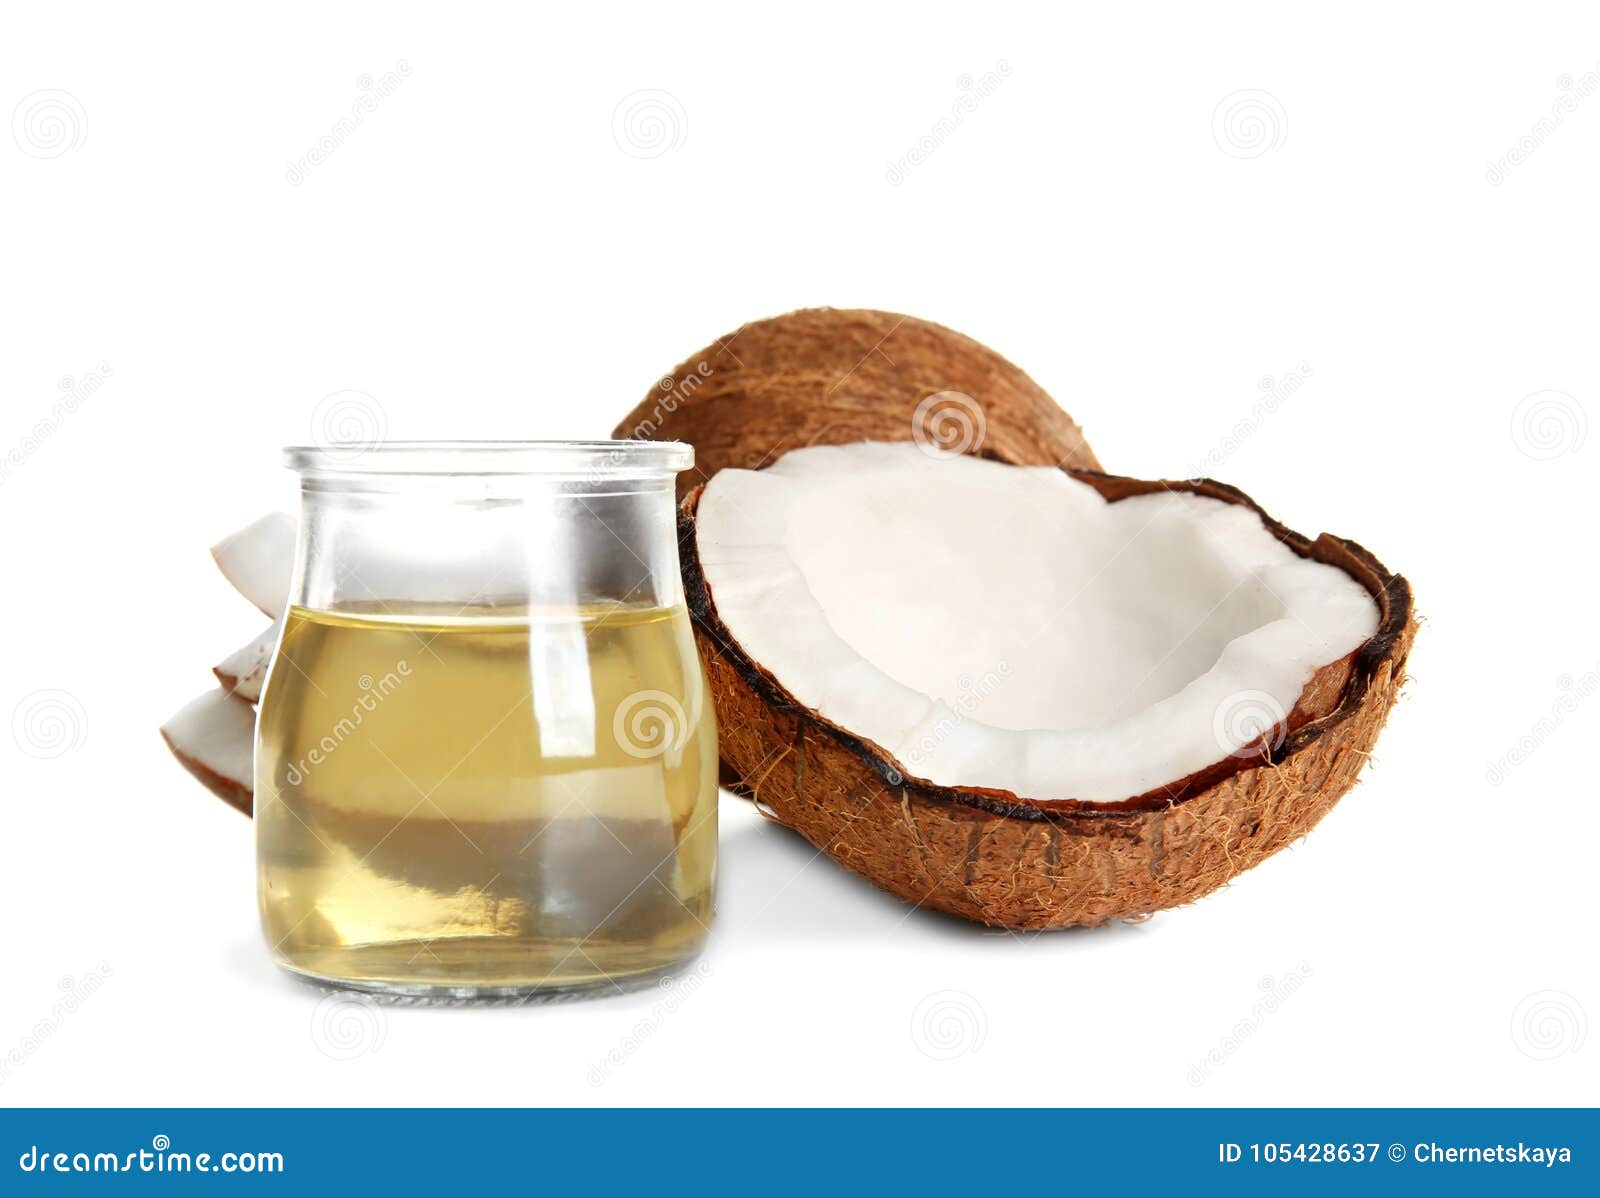 Jar with Melted Coconut Oil and Nut Stock Image - Image of closeup ...